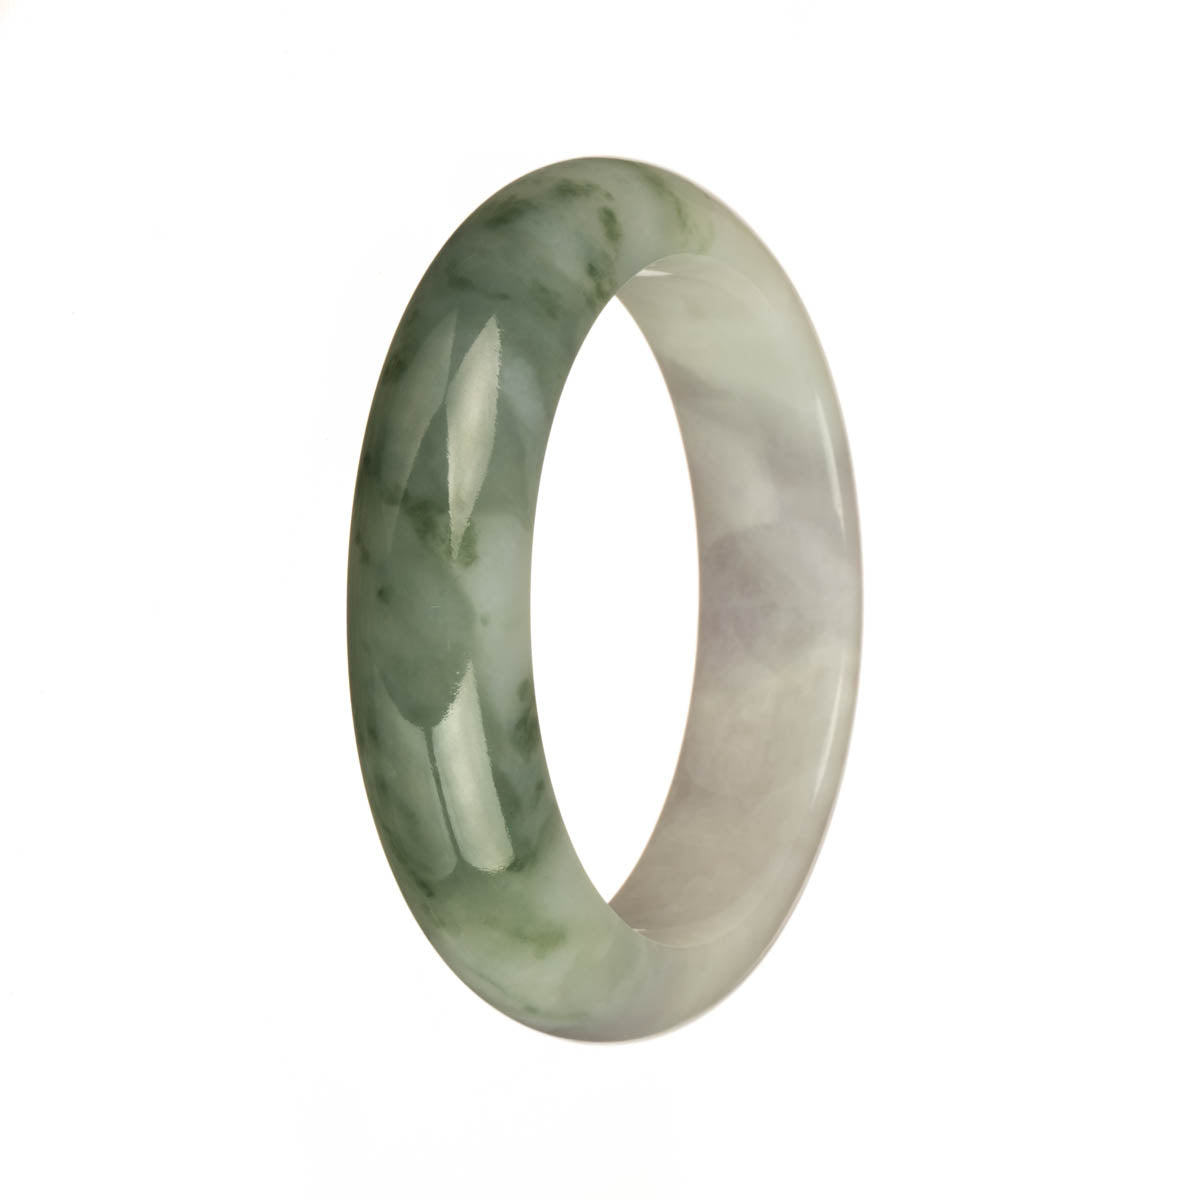 53mm White and Pale Lavender with Green Patterns Jade Bangle Bracelet